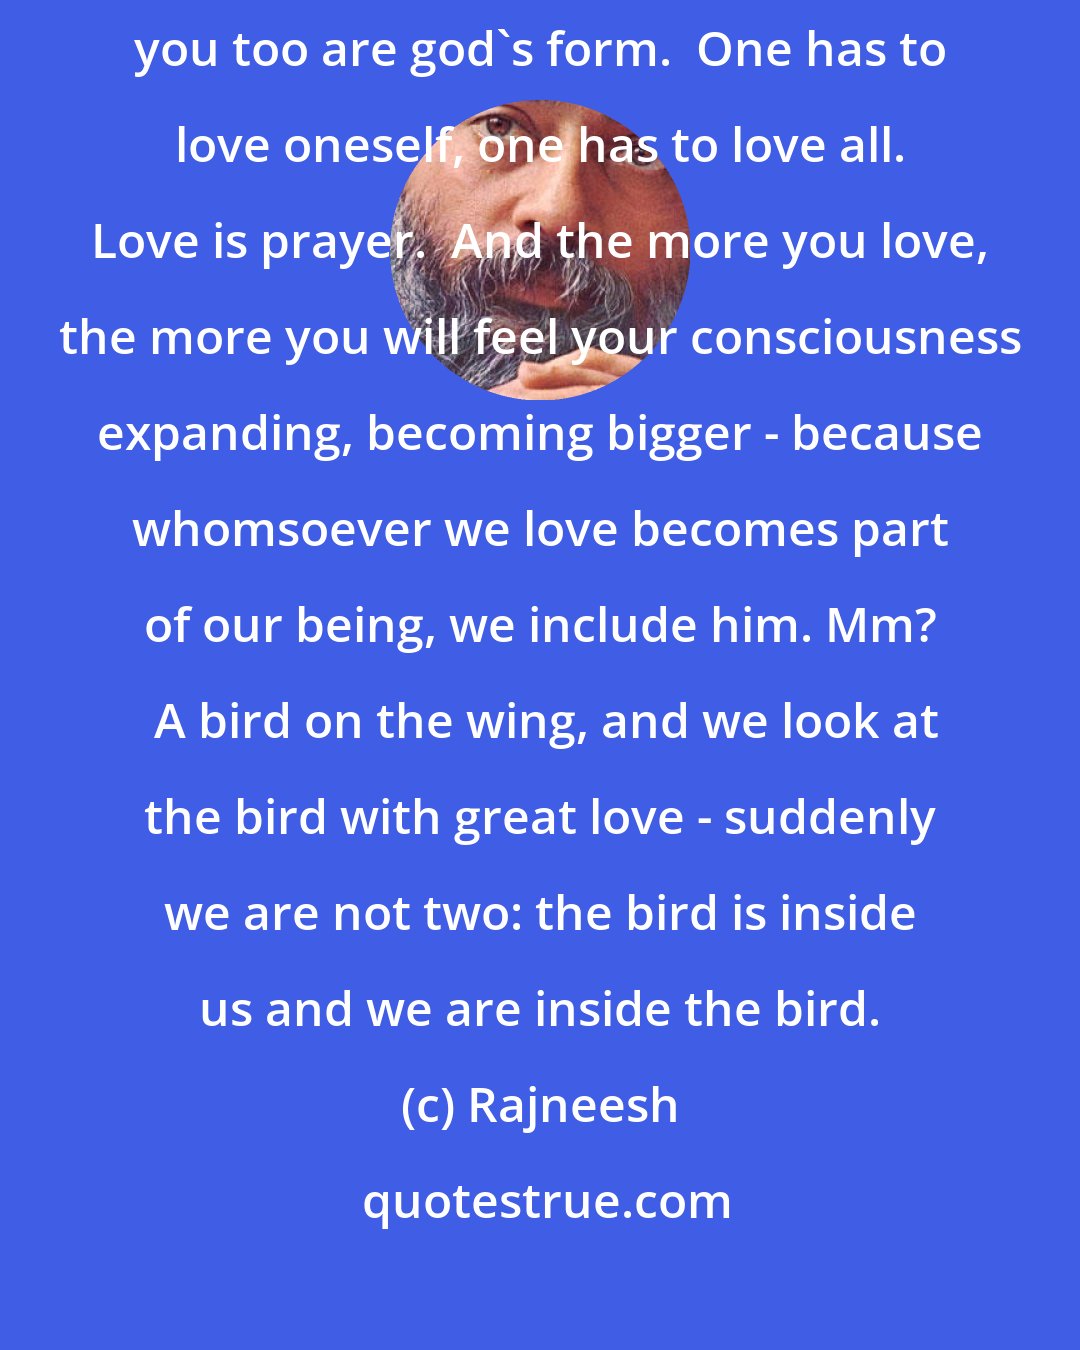 Rajneesh: Even towards yourself you have to be tremendously loving, because you too are god's form.  One has to love oneself, one has to love all. Love is prayer.  And the more you love, the more you will feel your consciousness expanding, becoming bigger - because whomsoever we love becomes part of our being, we include him. Mm?  A bird on the wing, and we look at the bird with great love - suddenly we are not two: the bird is inside us and we are inside the bird.